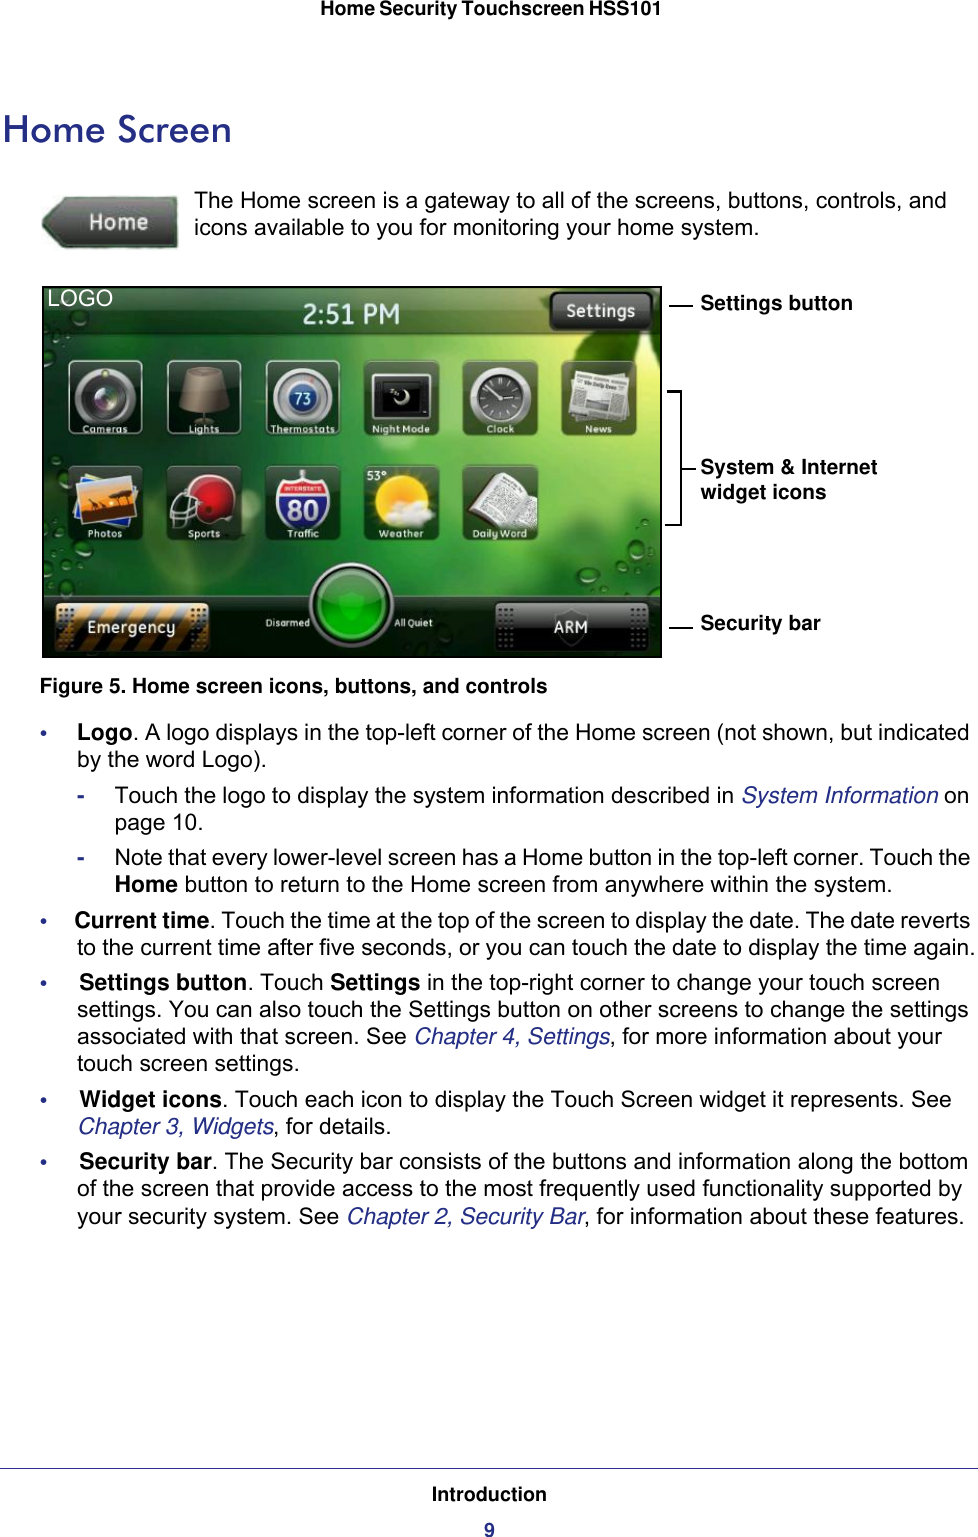 Introduction9 Home Security Touchscreen HSS101Home ScreenThe Home screen is a gateway to all of the screens, buttons, controls, and icons available to you for monitoring your home system.Security barSystem &amp; Internet widget iconsSettings buttonLOGOFigure 5. Home screen icons, buttons, and controls•     Logo. A logo displays in the top-left corner of the Home screen (not shown, but indicated by the word Logo). -Touch the logo to display the system information described in System Information on page  10. -Note that every lower-level screen has a Home button in the top-left corner. Touch the Home button to return to the Home screen from anywhere within the system.•     Current time. Touch the time at the top of the screen to display the date. The date reverts to the current time after five seconds, or you can touch the date to display the time again.•     Settings button. Touch Settings in the top-right corner to change your touch screen settings. You can also touch the Settings button on other screens to change the settings associated with that screen. See Chapter 4, Settings, for more information about your touch screen settings.•     Widget icons. Touch each icon to display the Touch Screen widget it represents. See Chapter 3, Widgets, for details.•     Security bar. The Security bar consists of the buttons and information along the bottom of the screen that provide access to the most frequently used functionality supported by your security system. See Chapter 2, Security Bar, for information about these features.